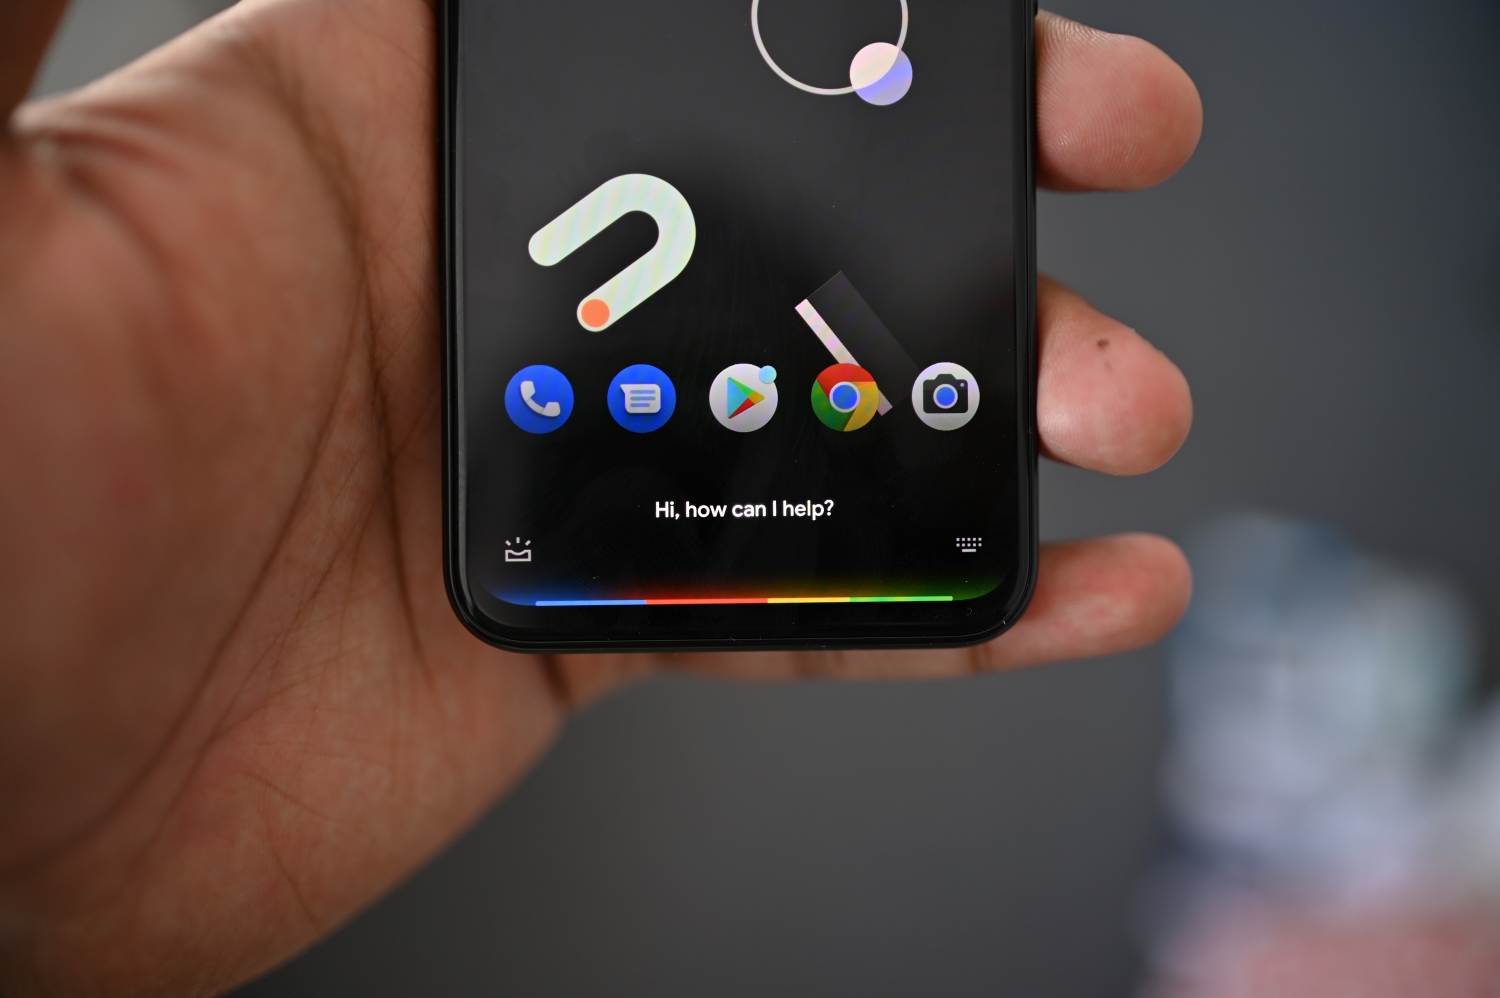 Google Assistant 2.0 on the Pixel 4.